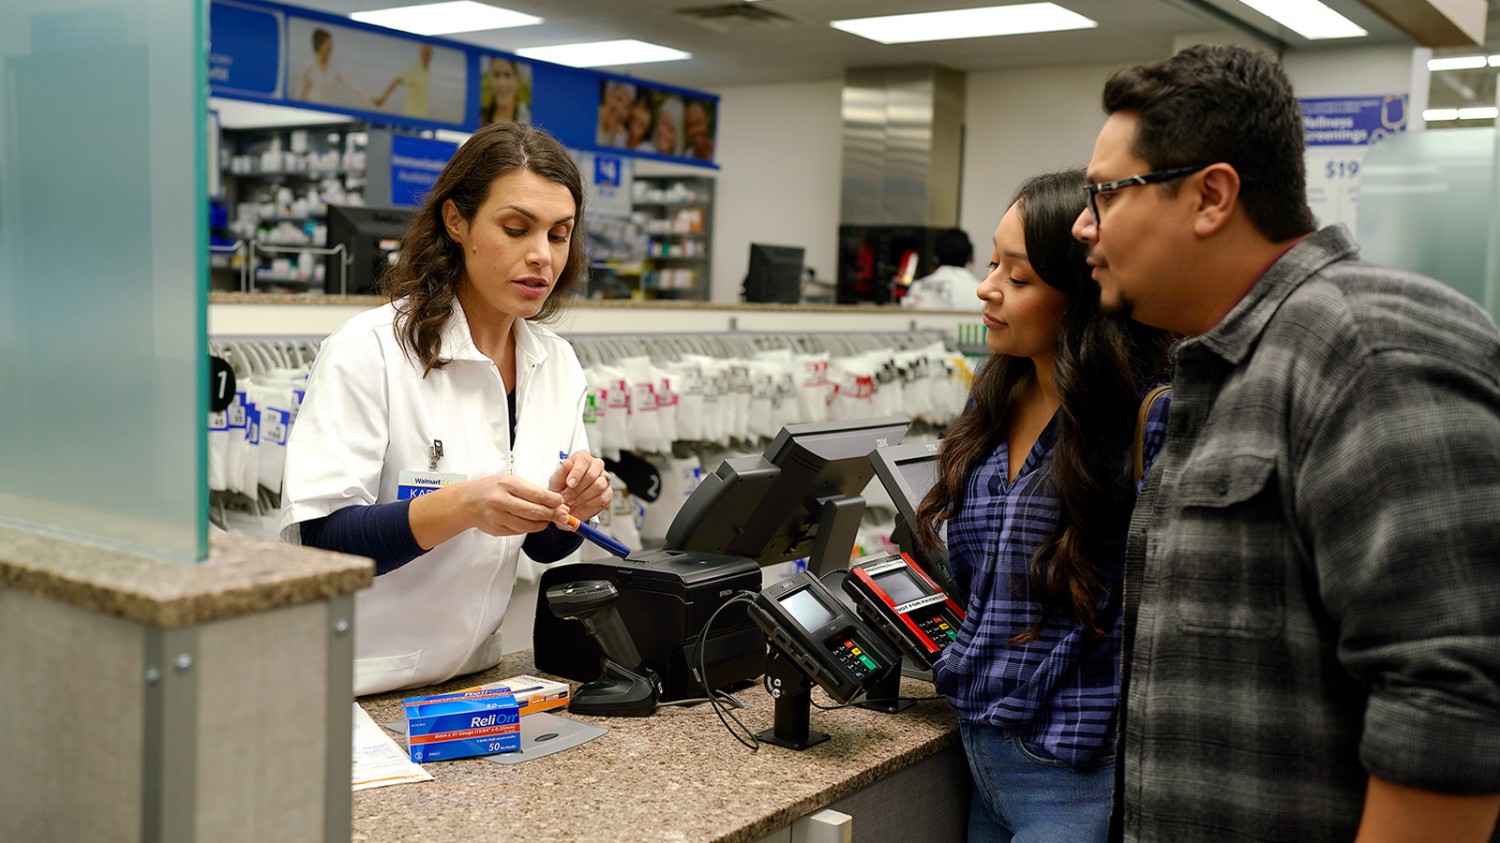 A female Walmart Pharmacist stands behind the counter holding a ReliOn insulin pen while pointing to the label. She is seen discussing with male and female customers.